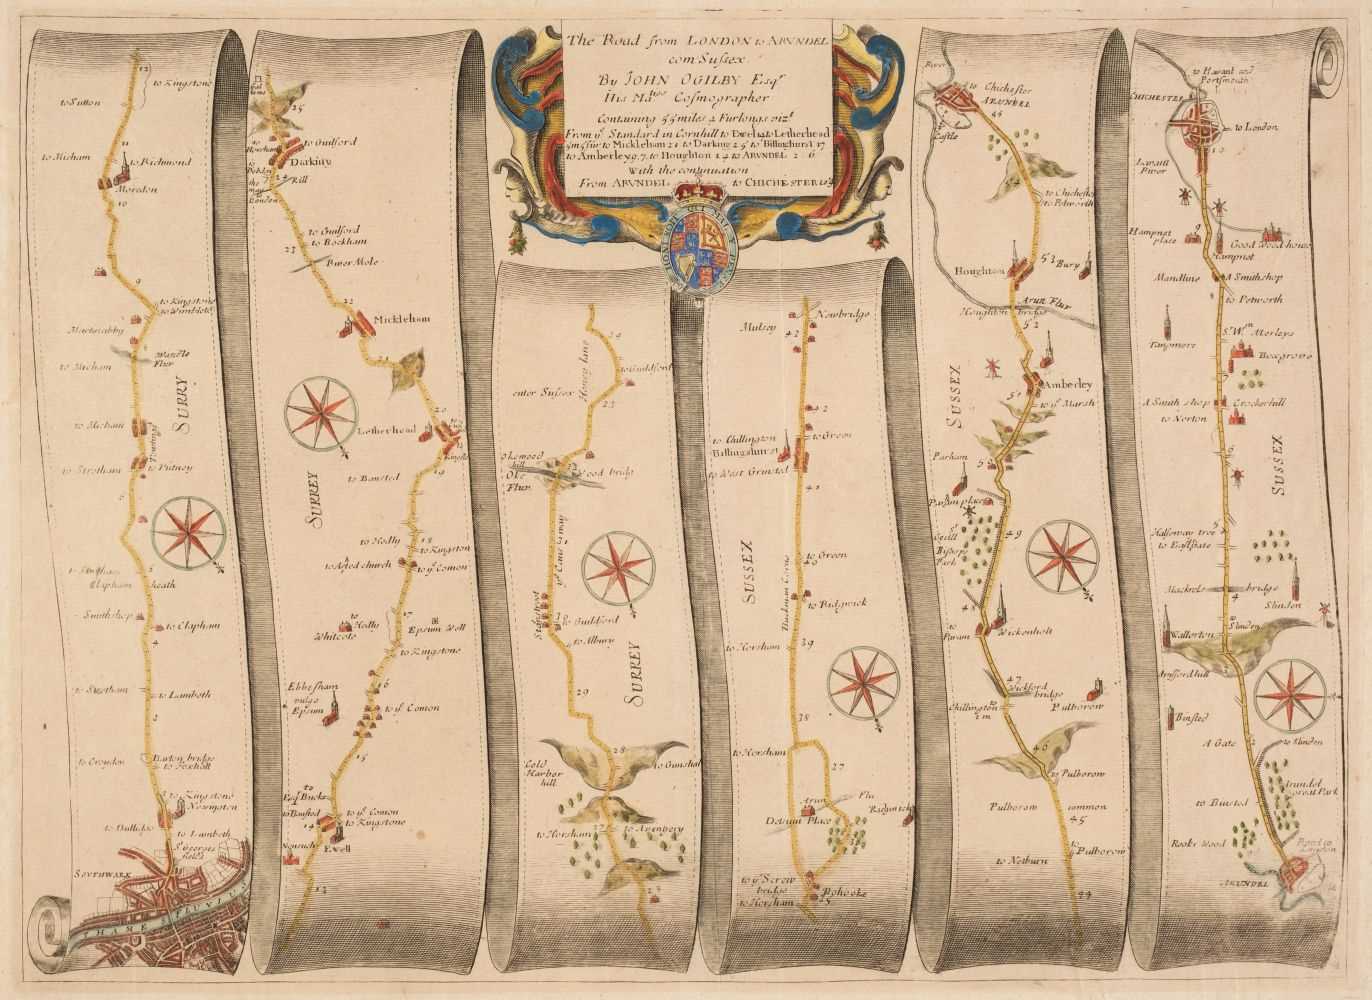 Lot 125 - Ogilby (John). A collection of 10 maps [1675 or later]